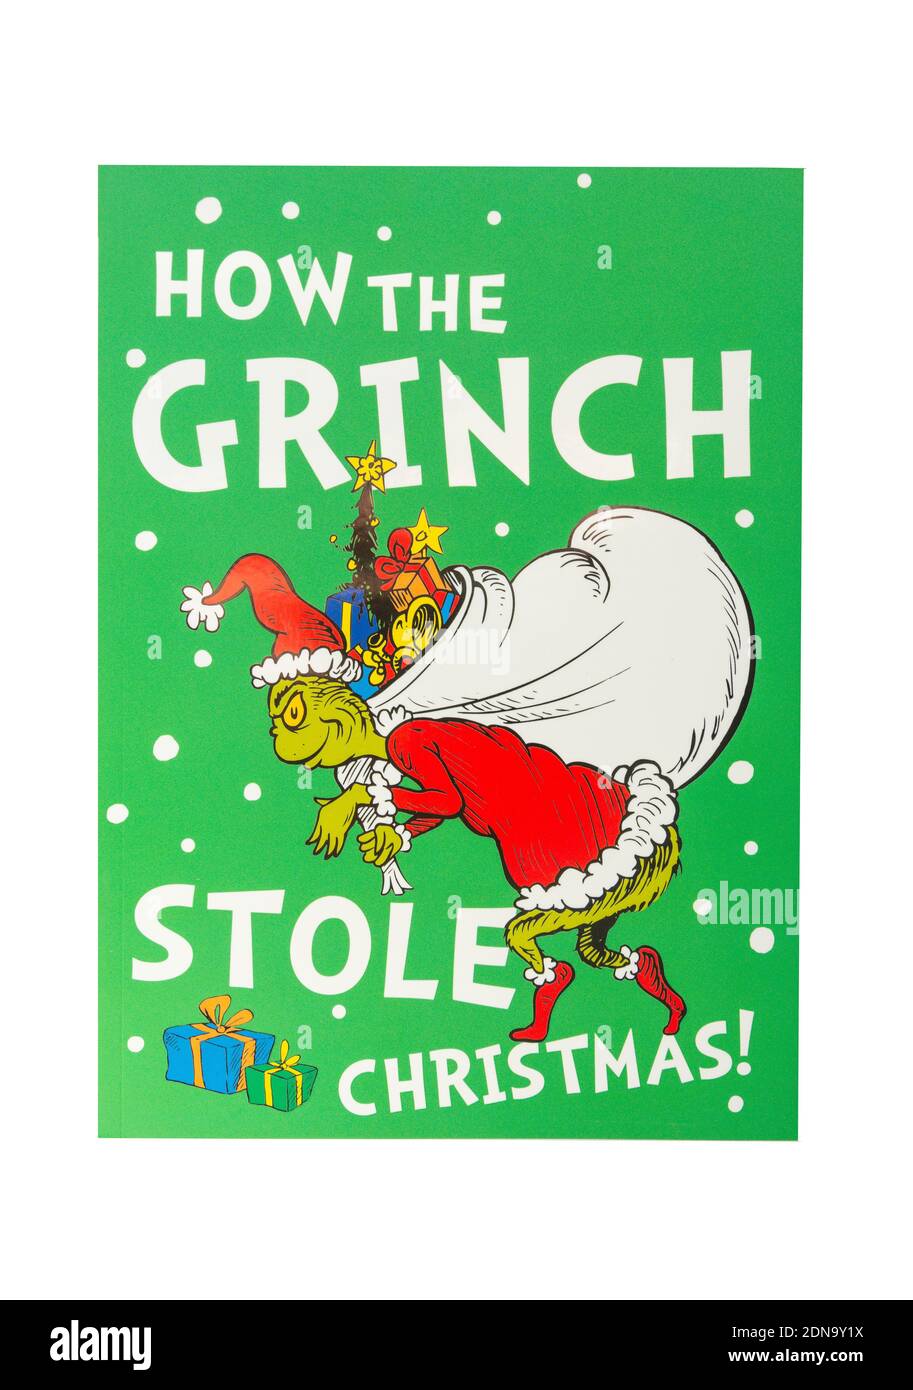 How the Grich stole Christmas by Dr Zeus, Greater London, England, United Kingdom Stock Photo